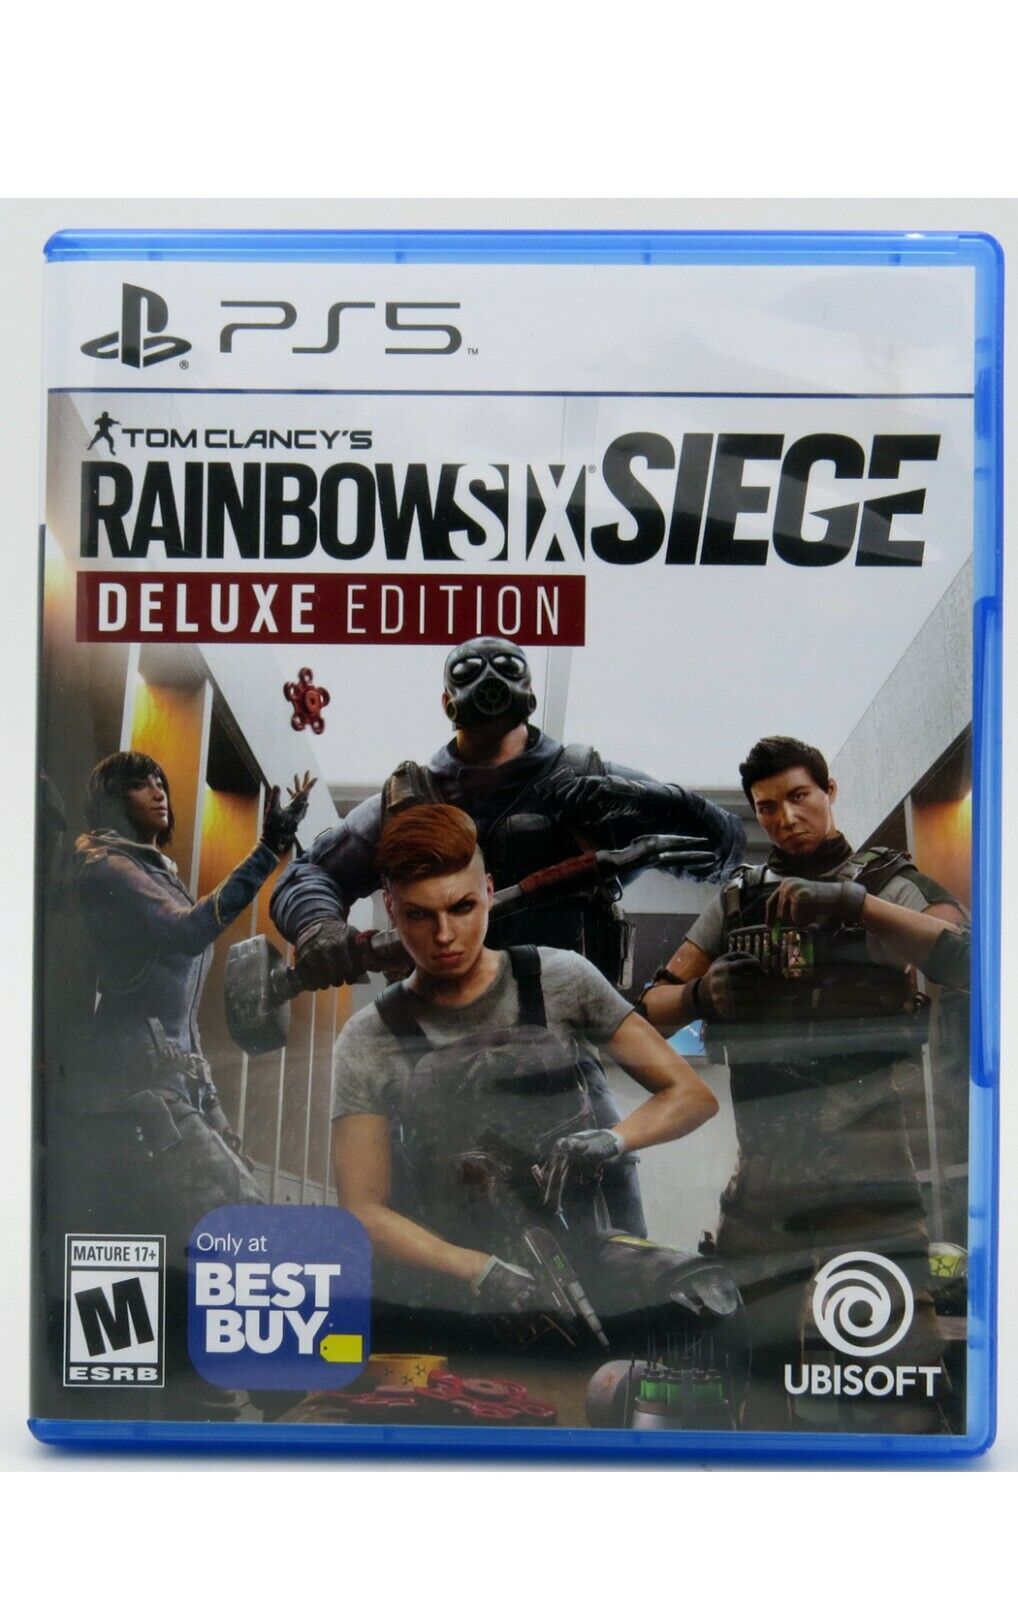 Used Sony Rainbow Mas Tacos Siege Tom Edition Y 5 Six PS5 Clancy\'s – – PlayStation – Deluxe